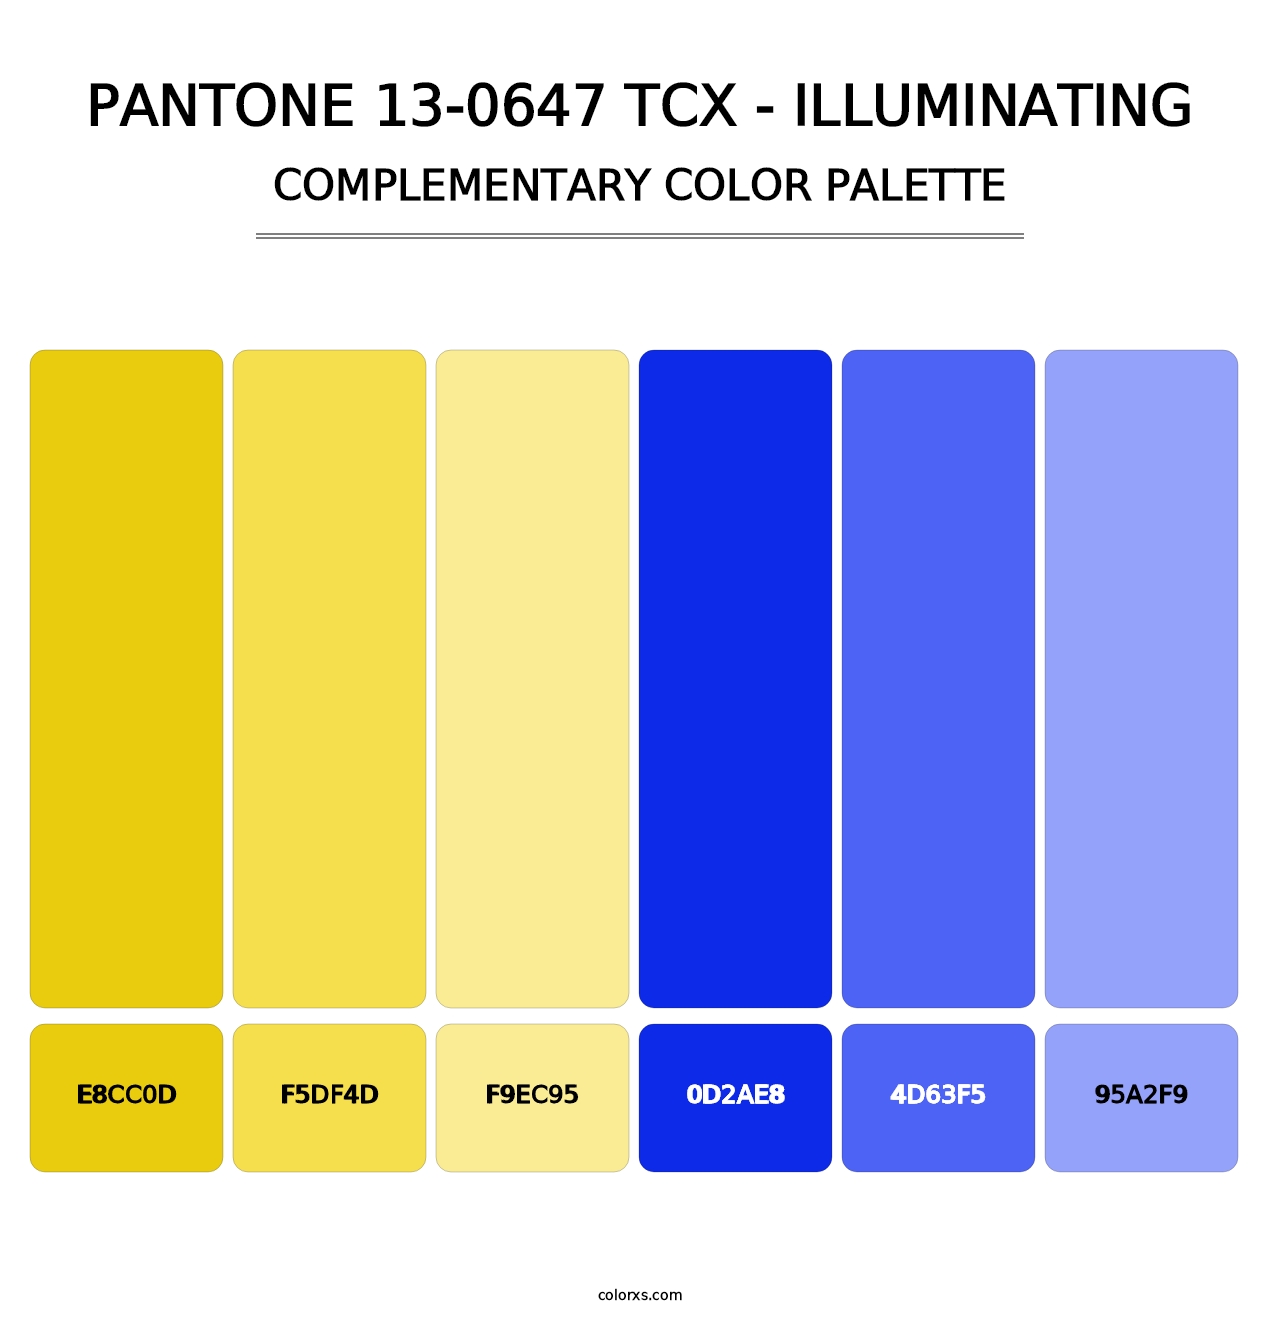 PANTONE 13-0647 TCX - Illuminating - Complementary Color Palette